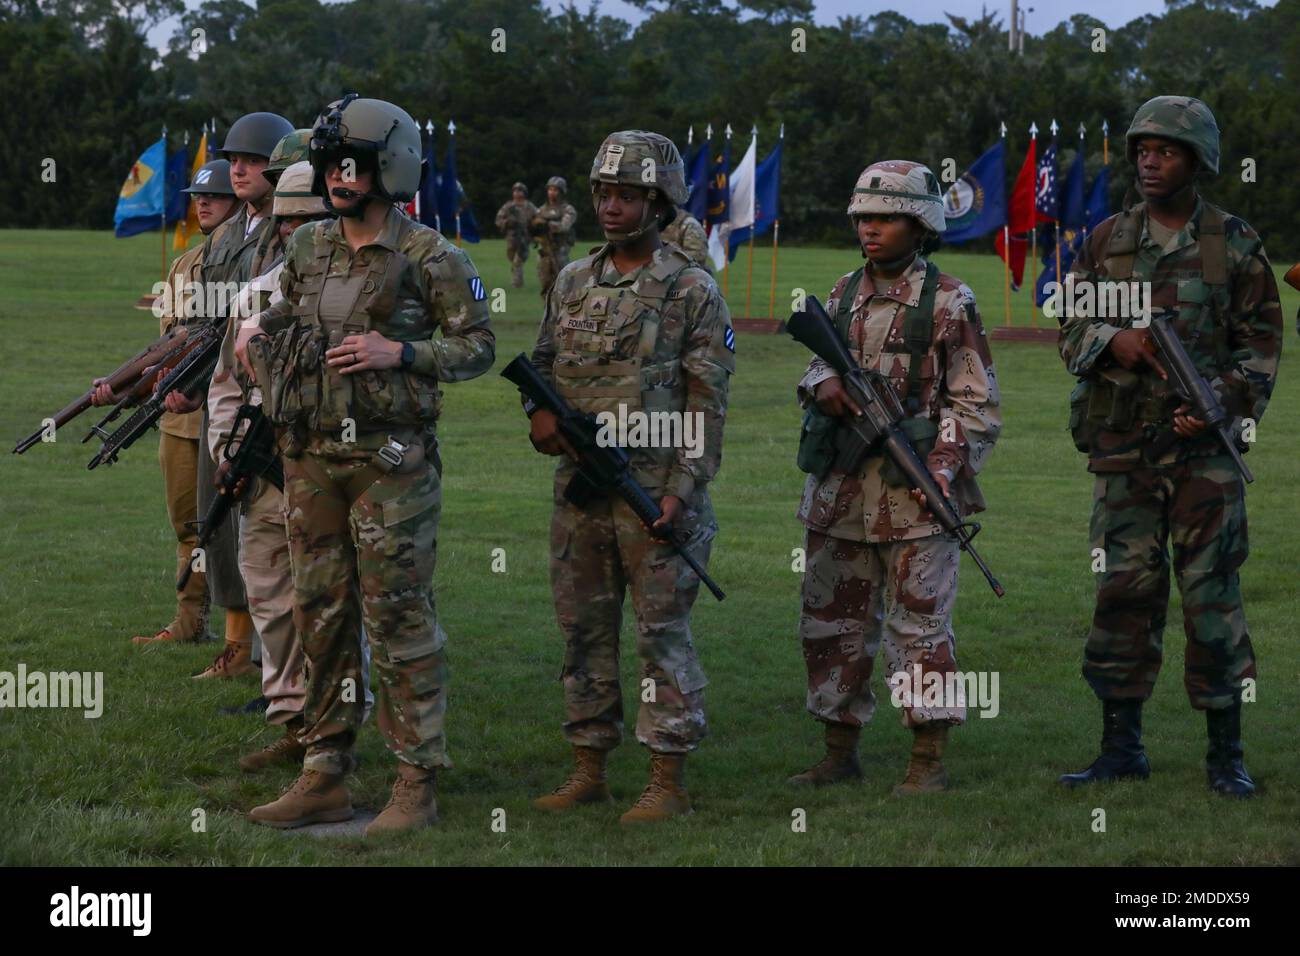 Ft Stewarts 3rd ID holds annual Twilight Tattoo ceremony for Marne Week